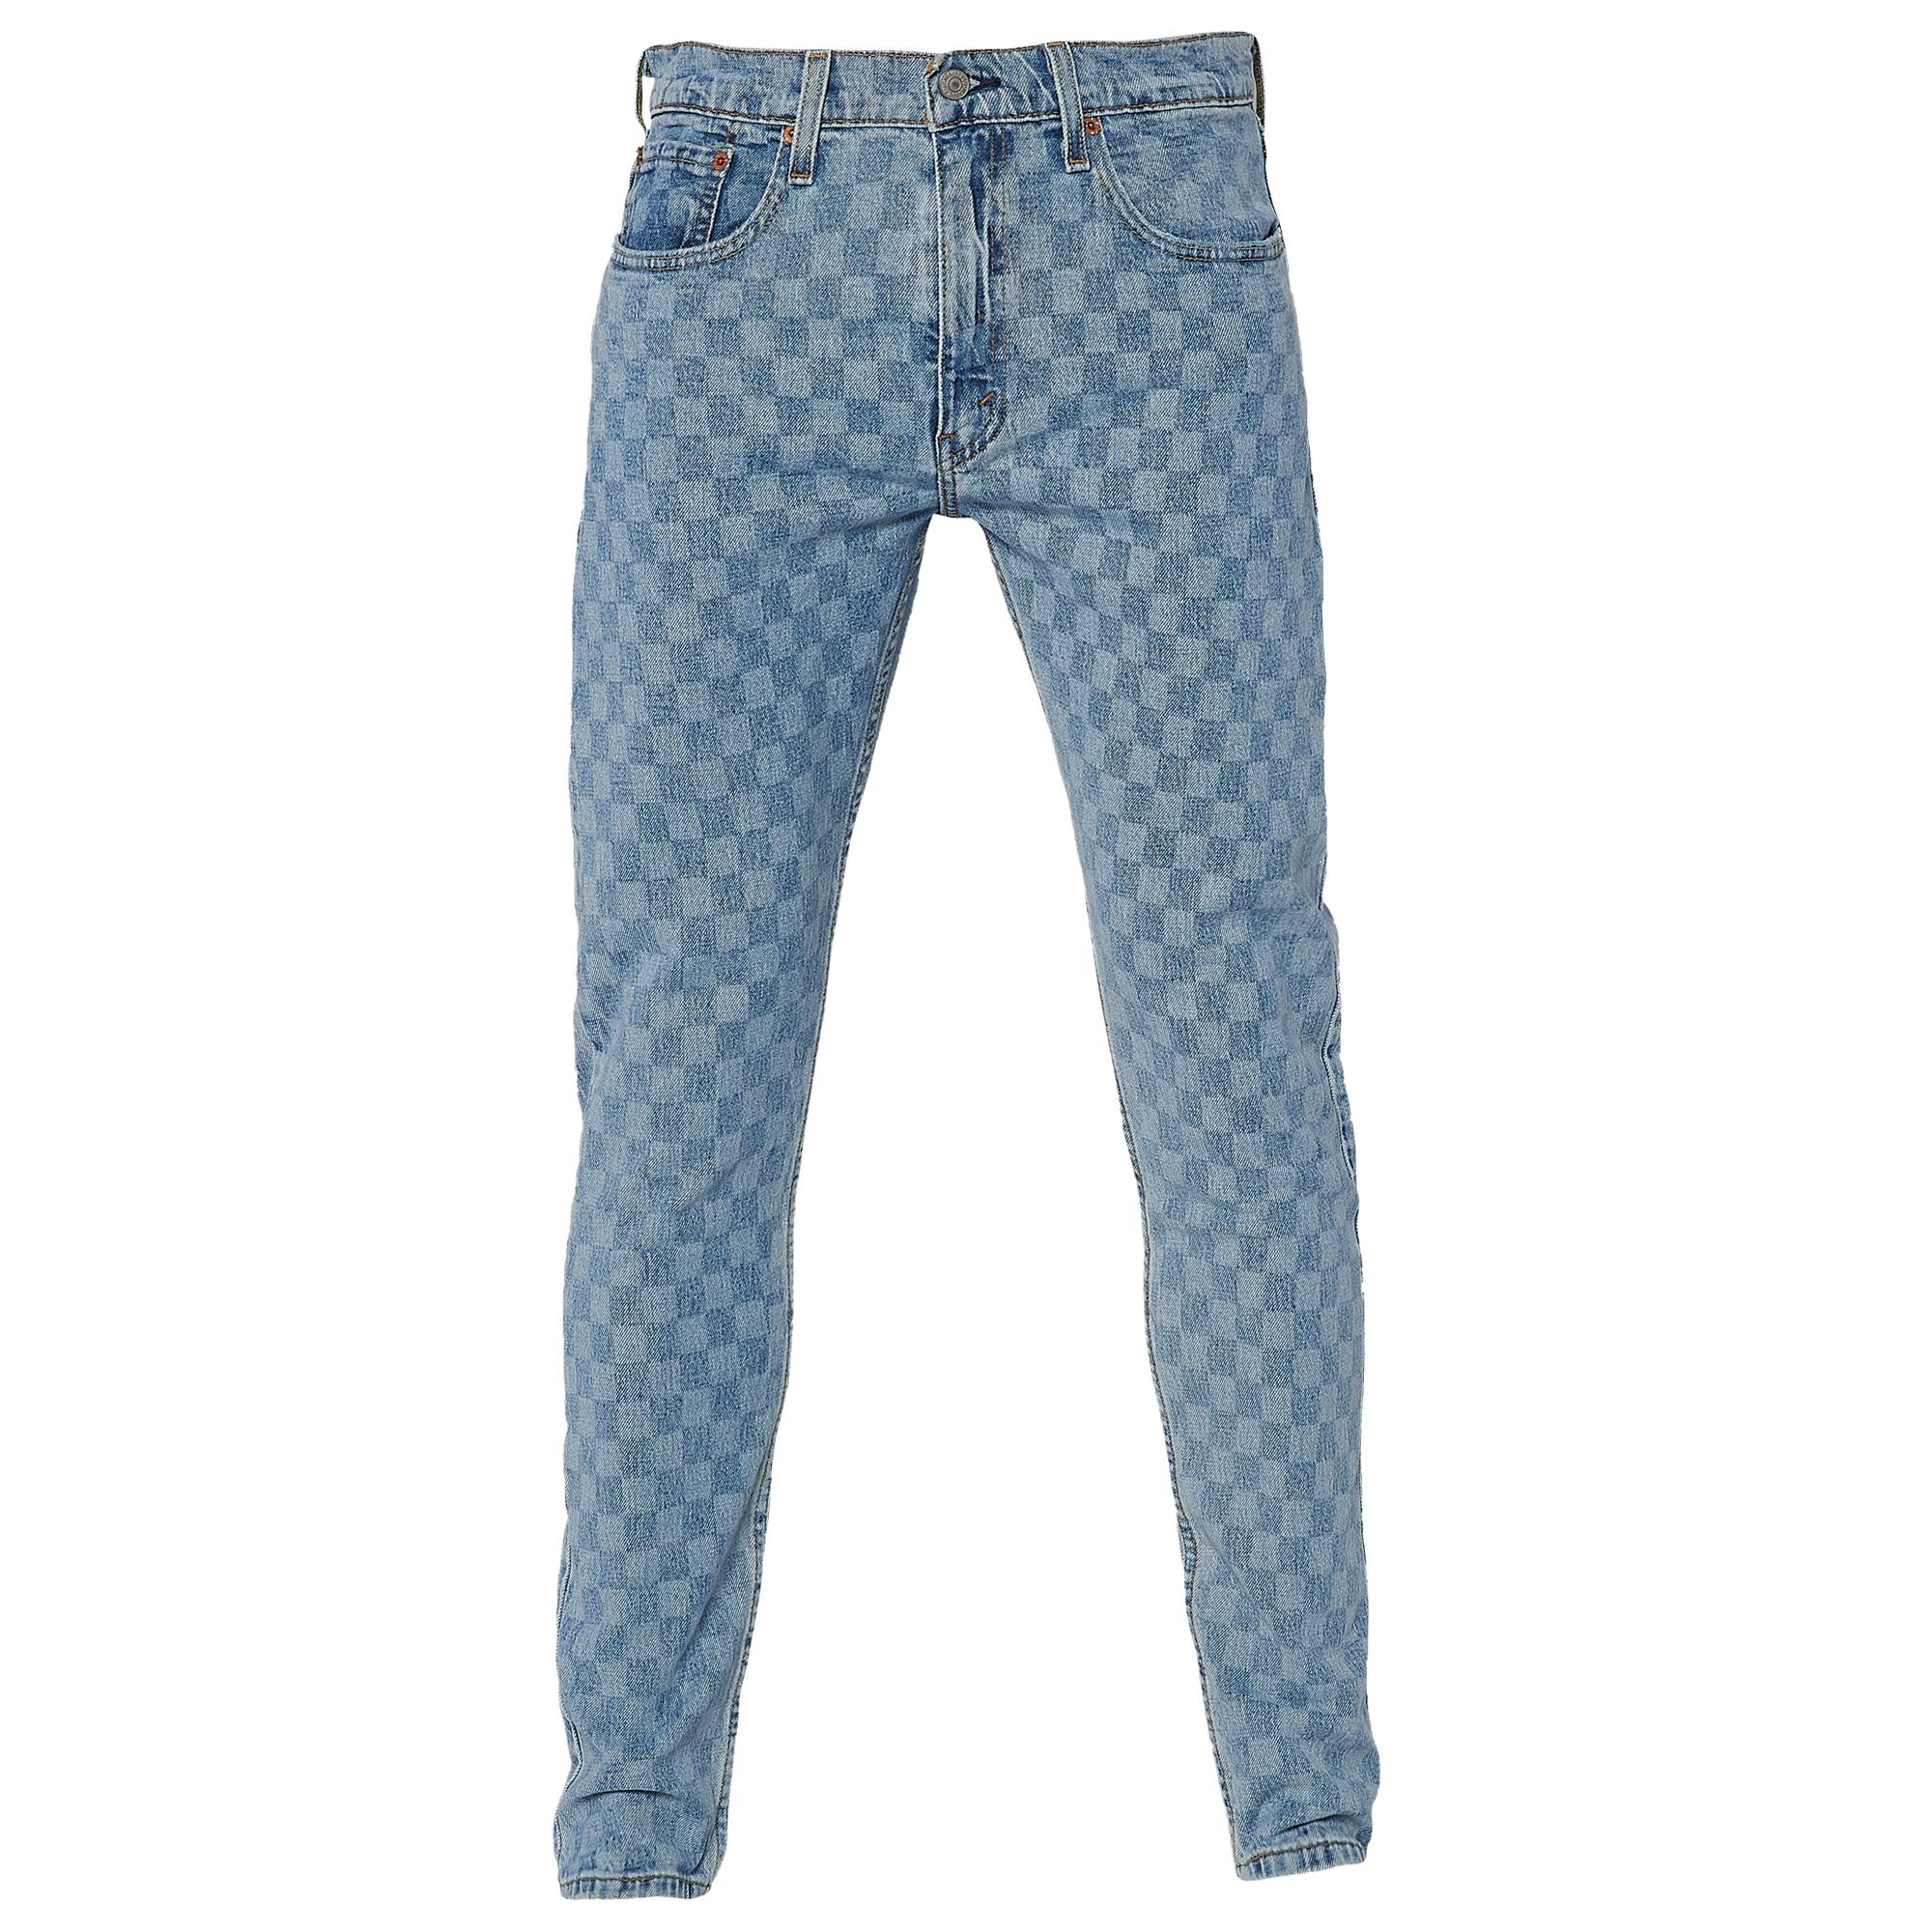 Levi's Checkered Jeans Shop, SAVE 33% - cityhygieneservices.co.uk